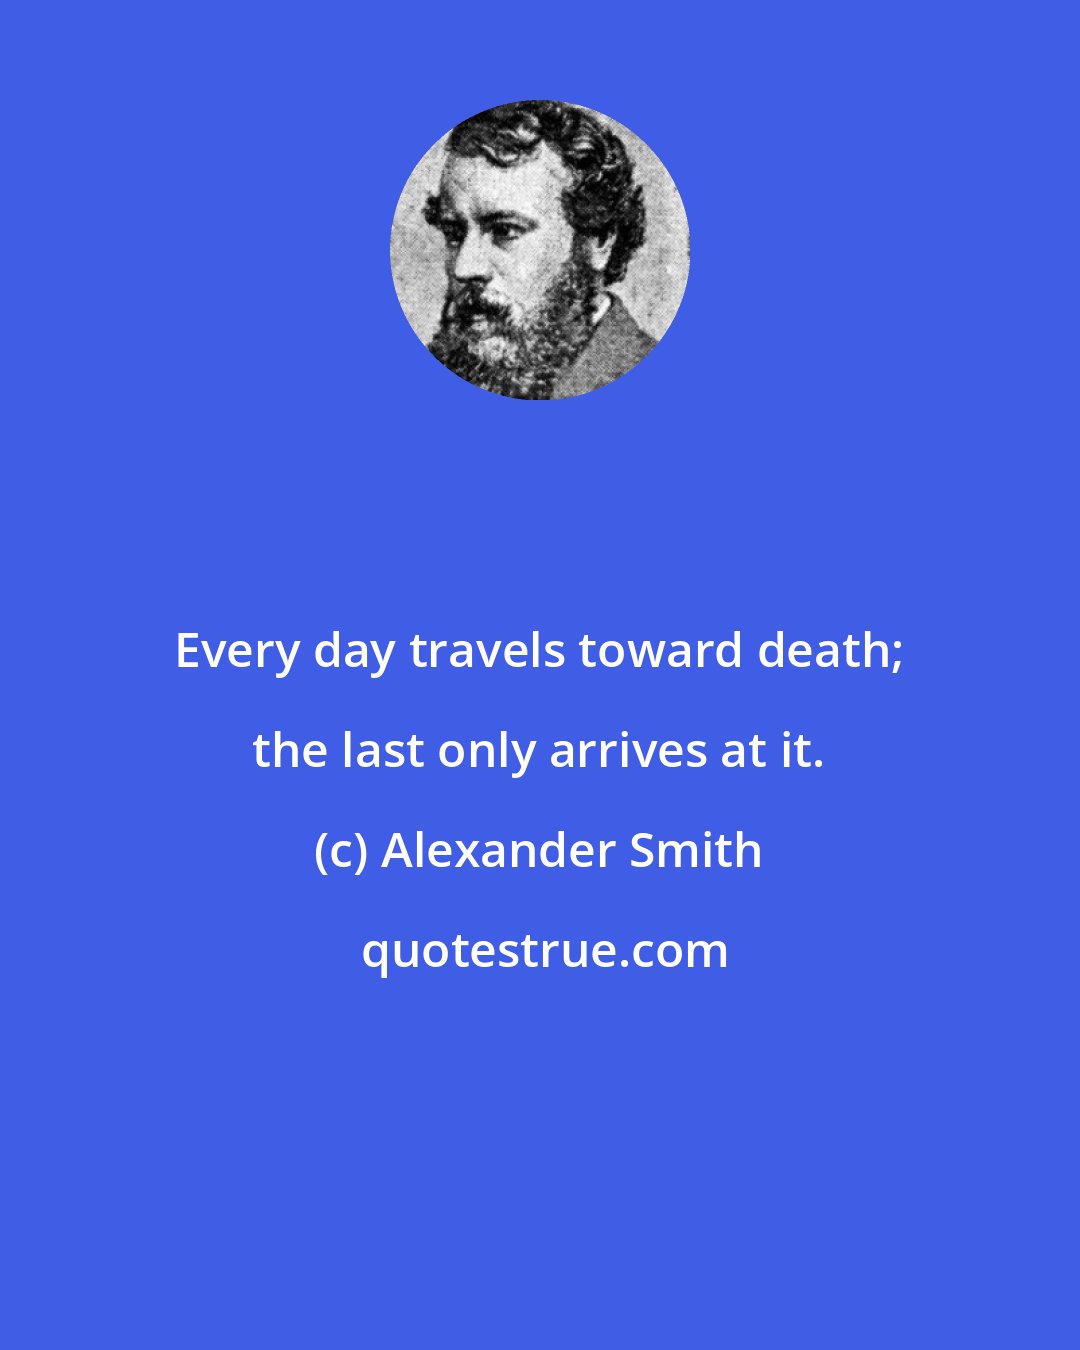 Alexander Smith: Every day travels toward death; the last only arrives at it.